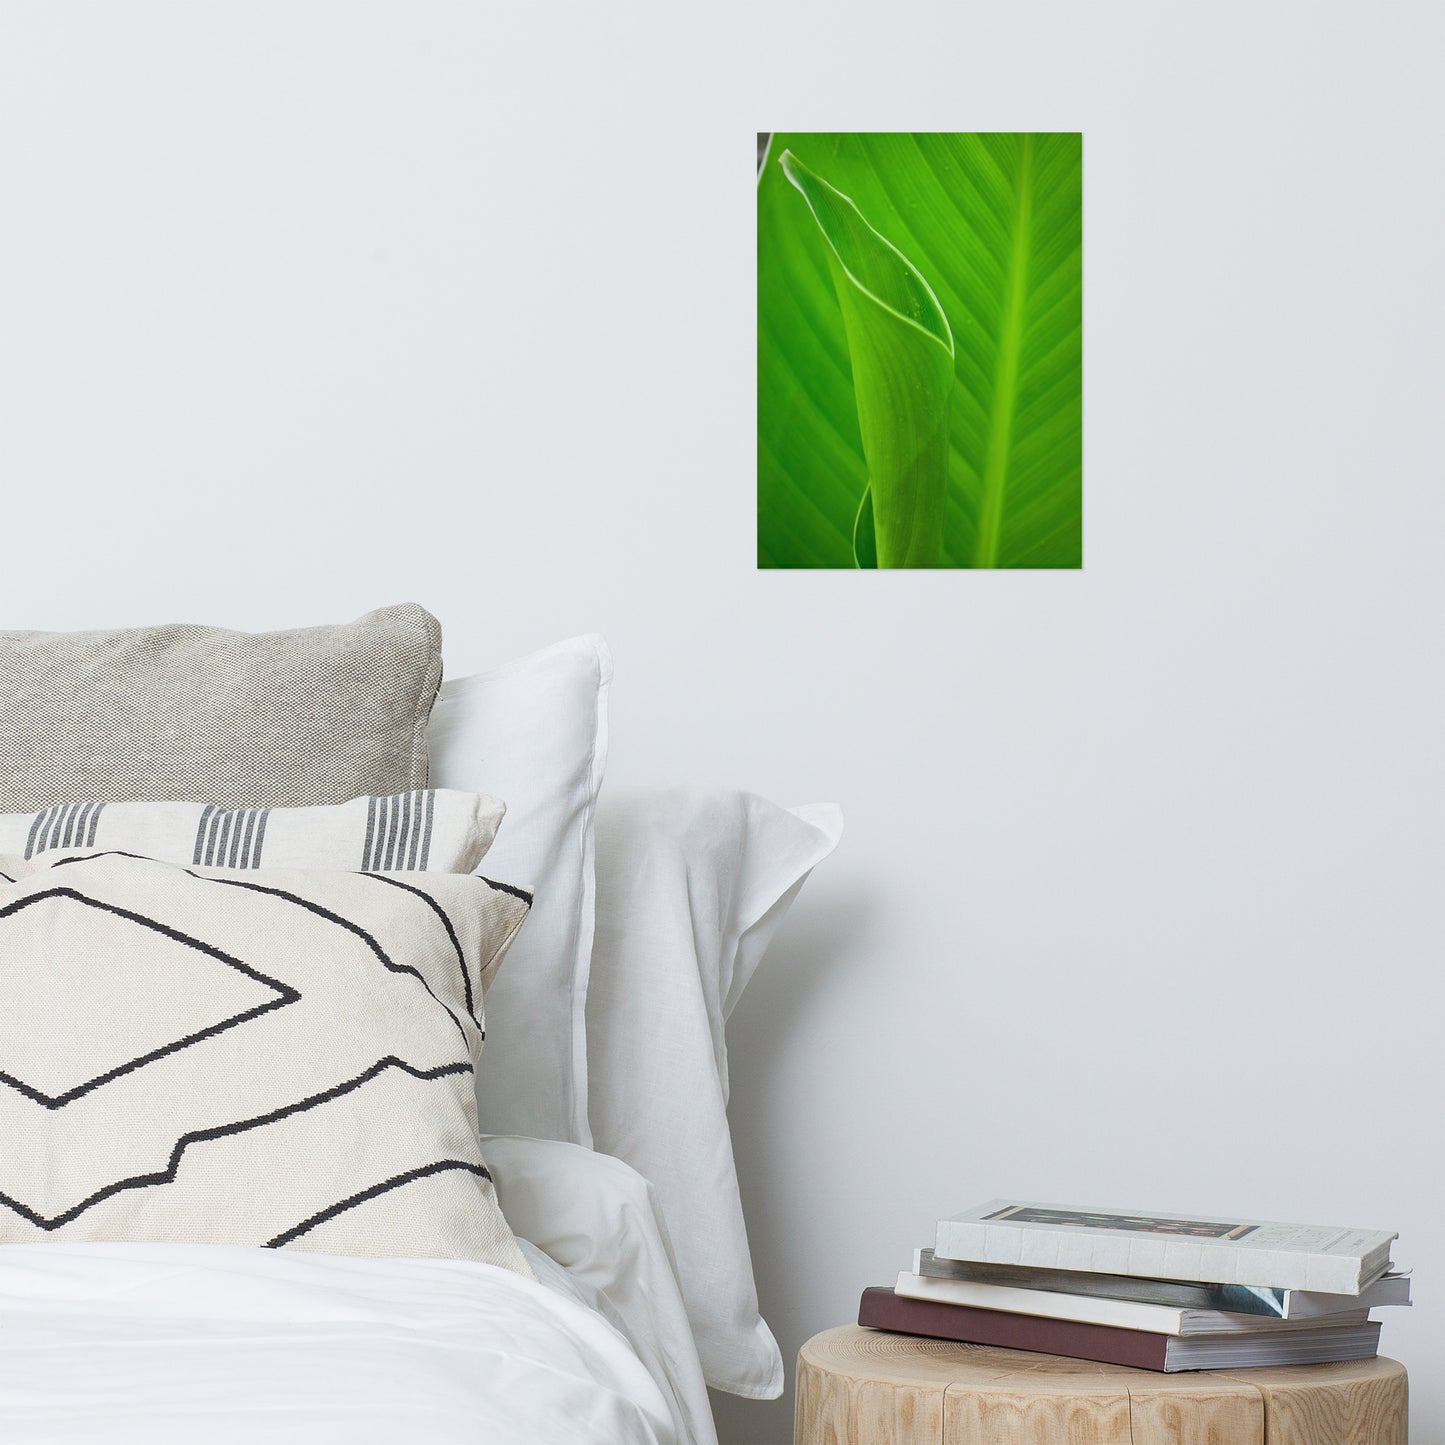 Leaves of Canna Lily Botanical Nature Photo Loose Unframed Wall Art Prints